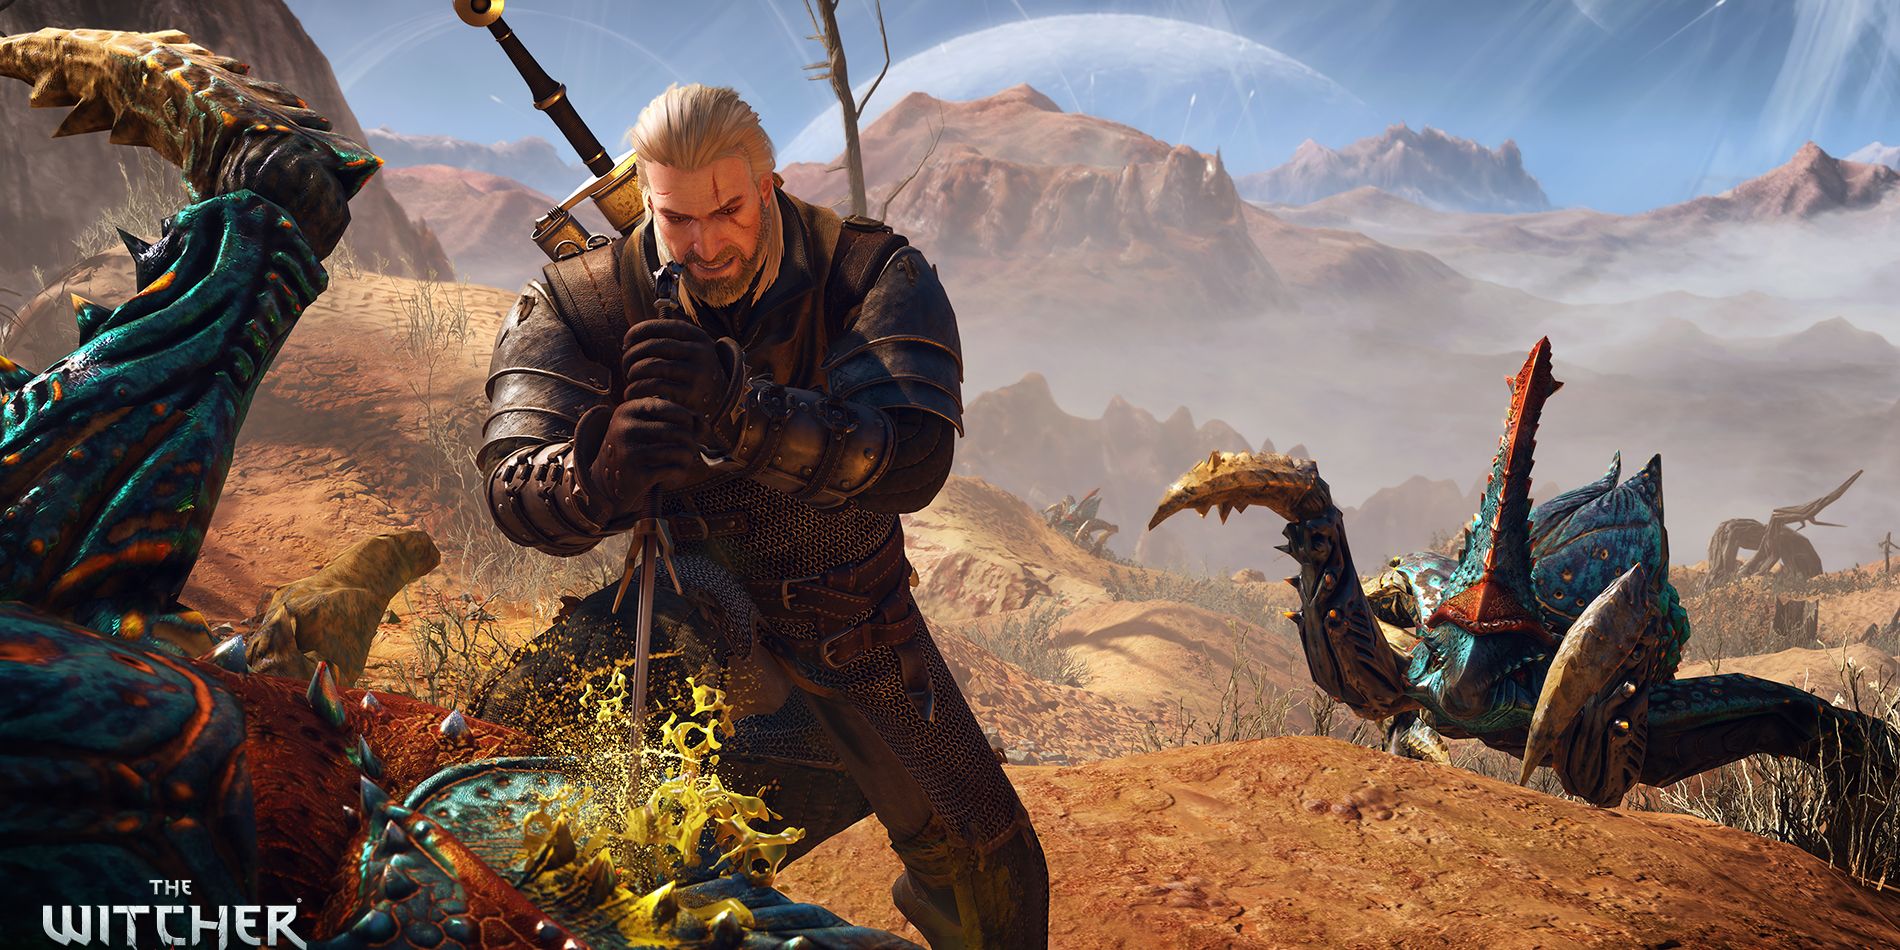 Geralt stabbing a monster to death in a sandy desert in The Witcher 3